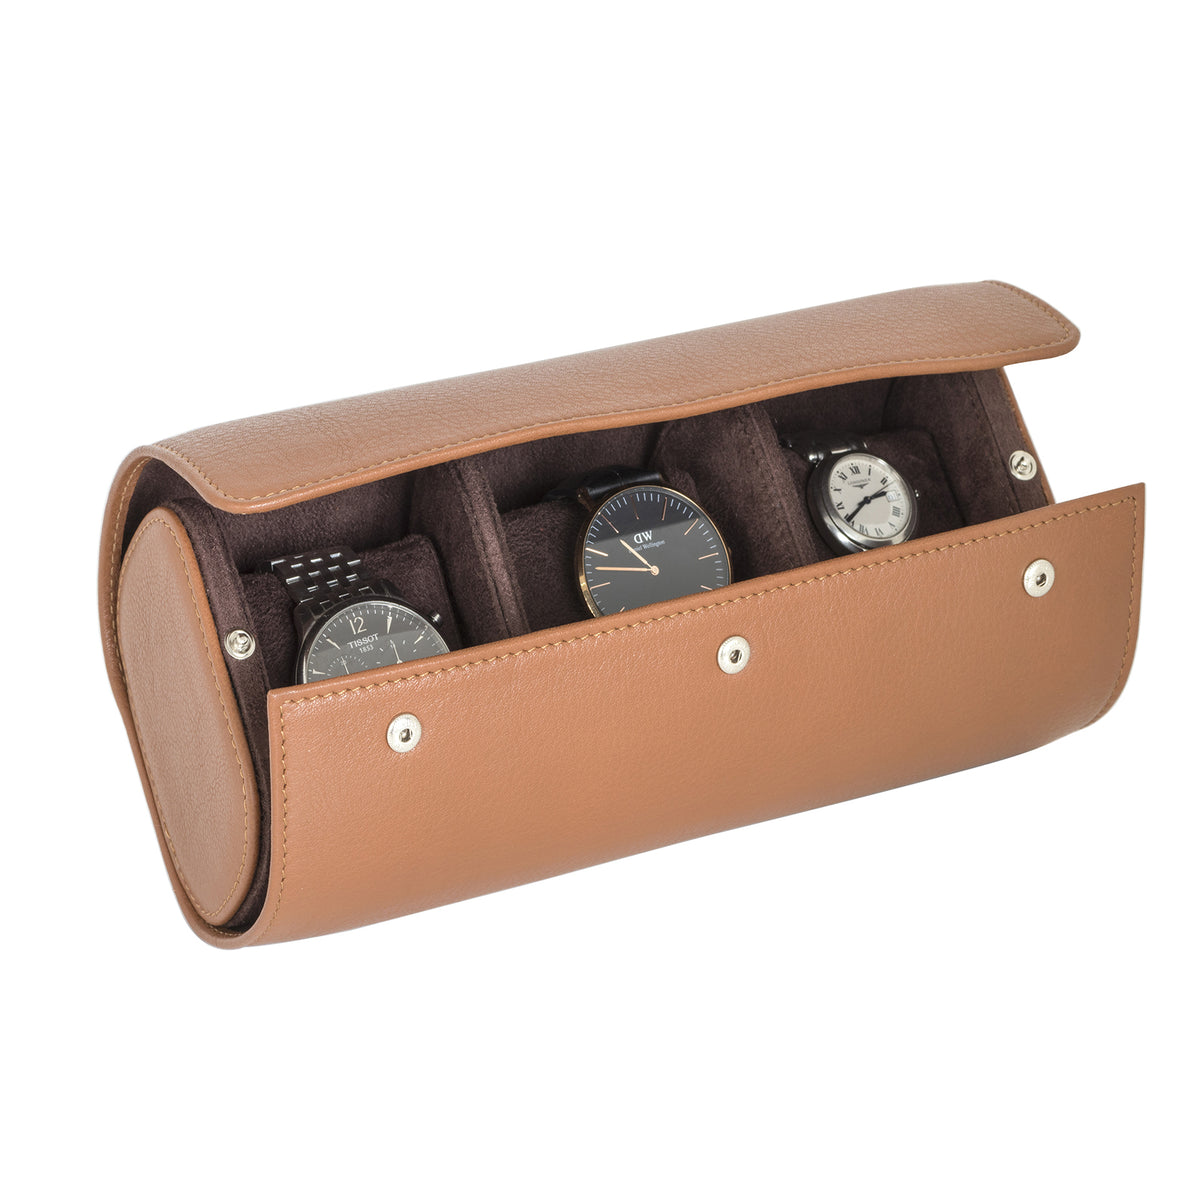 Travellers watch roll box